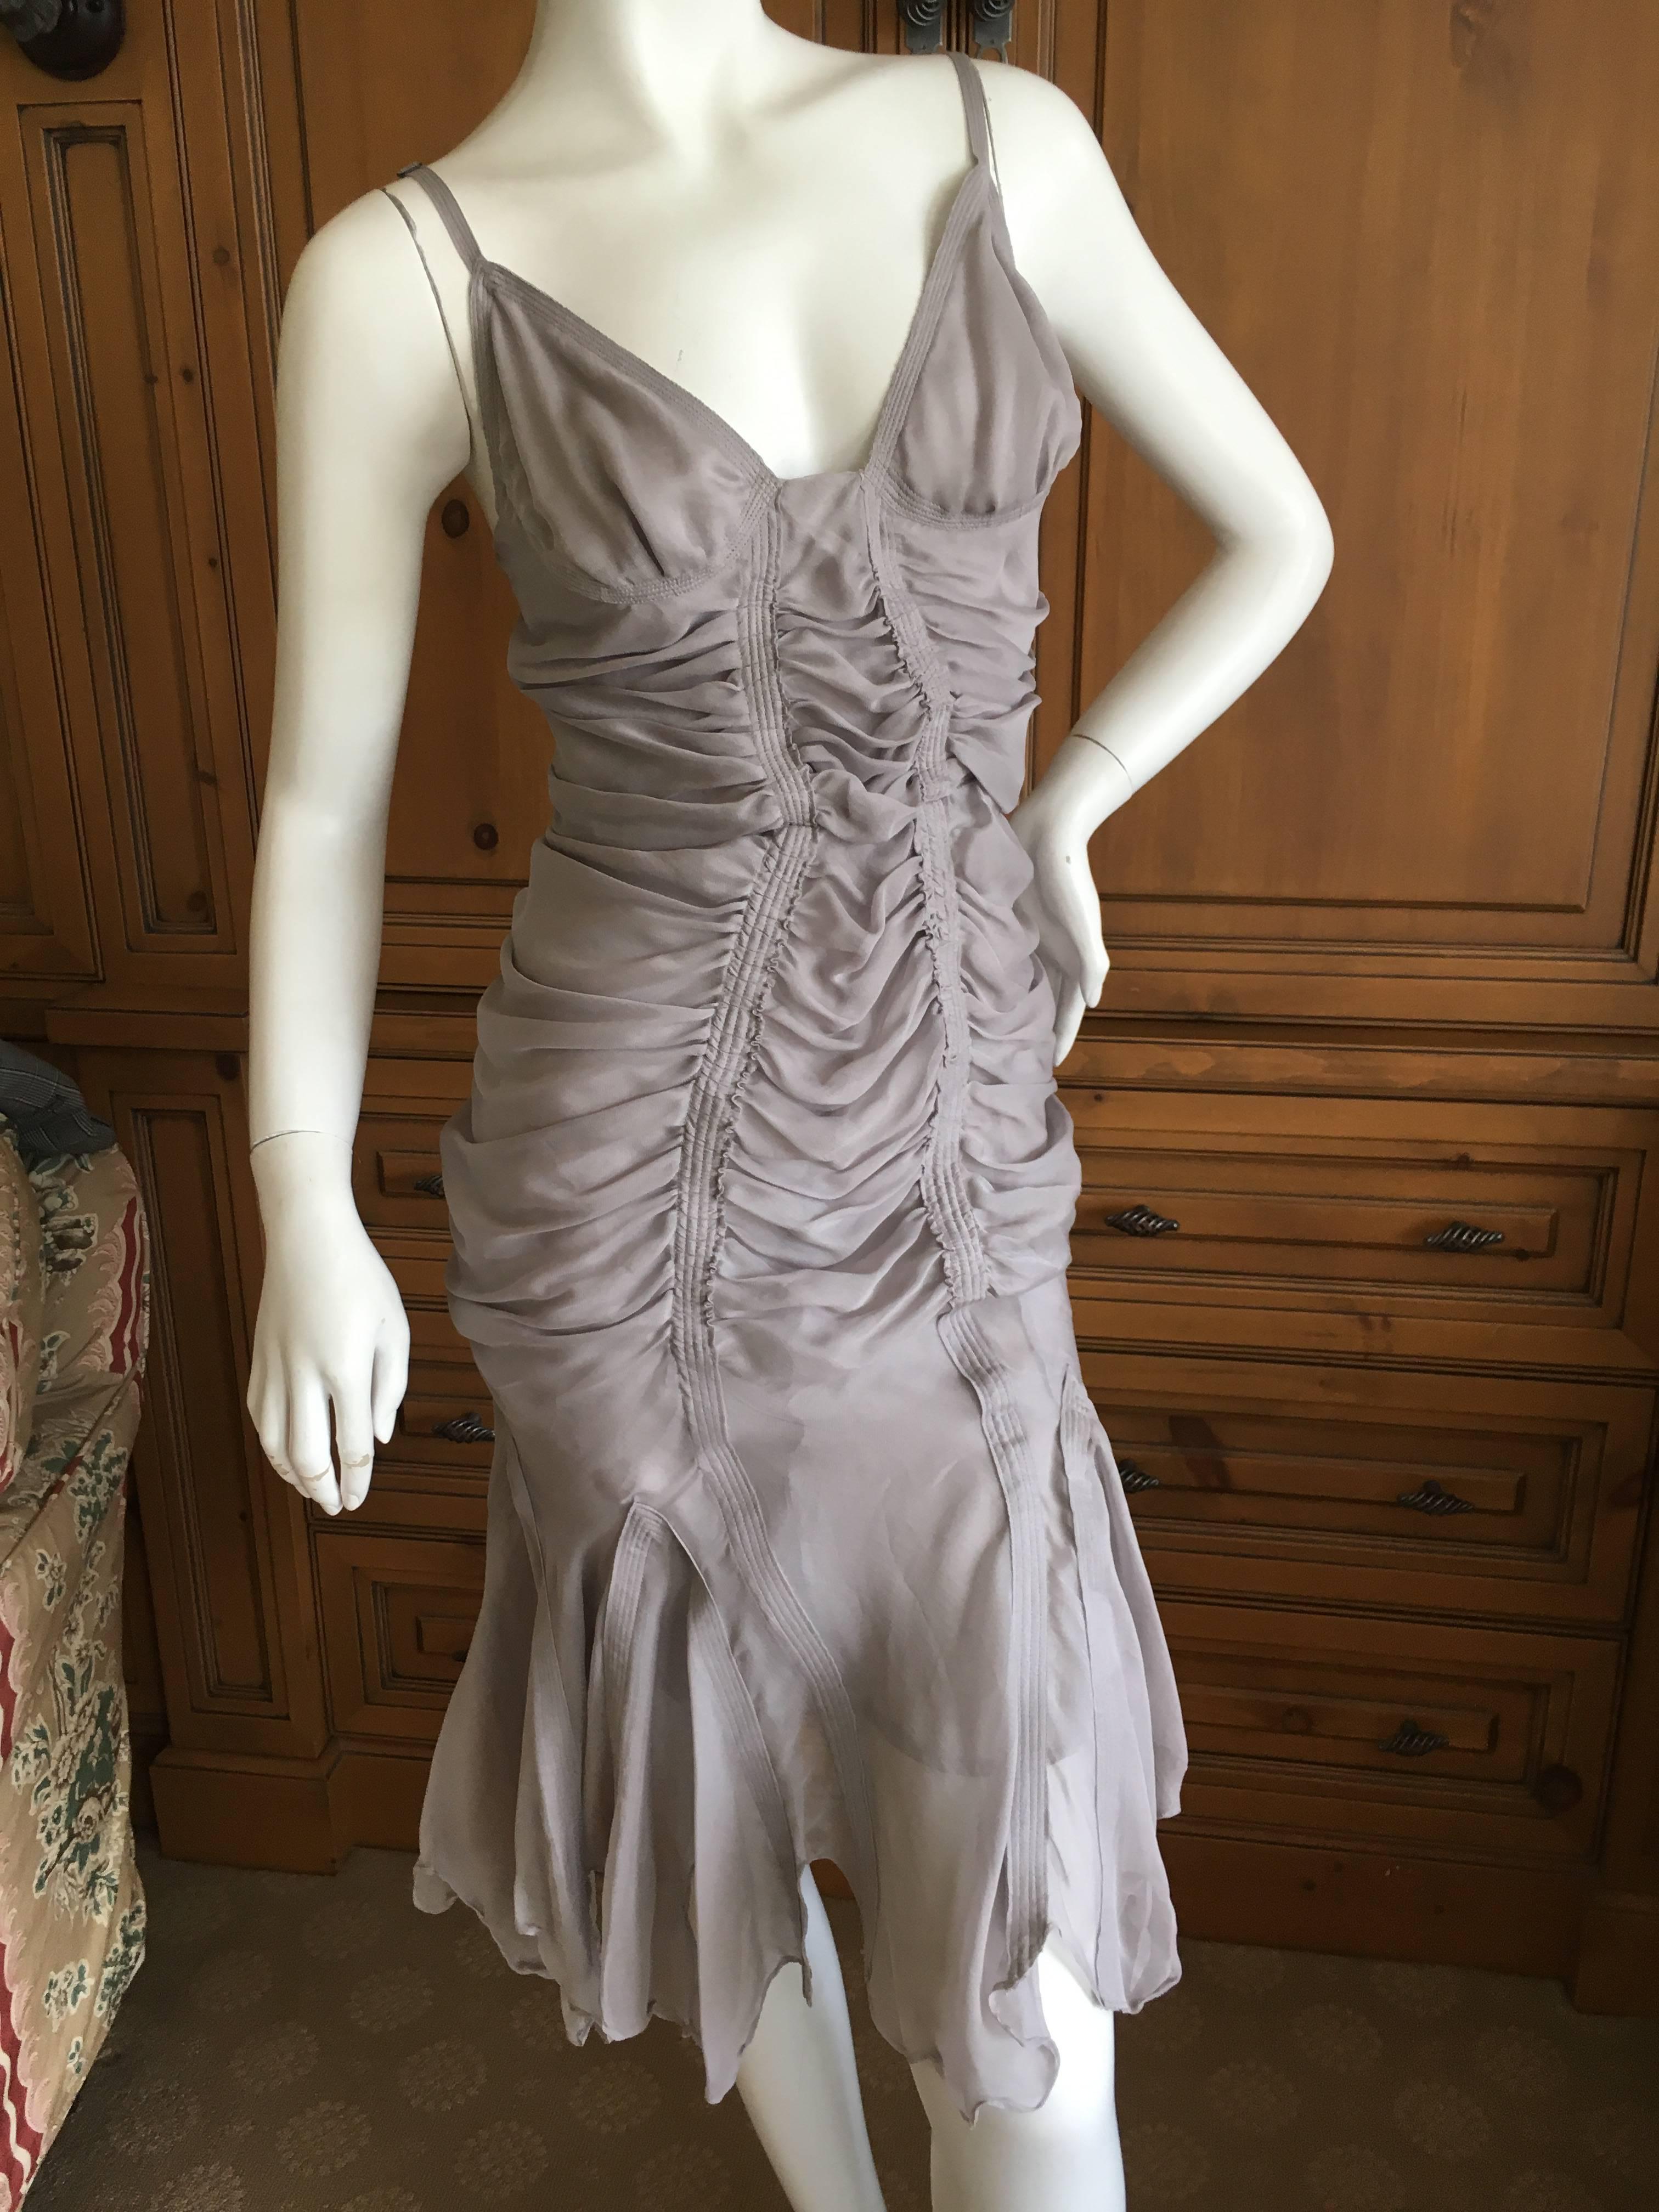 Yves Saint Laurent by Tom Ford Gray Gathered Dress .
From 2003.
Size 38
Bust 36